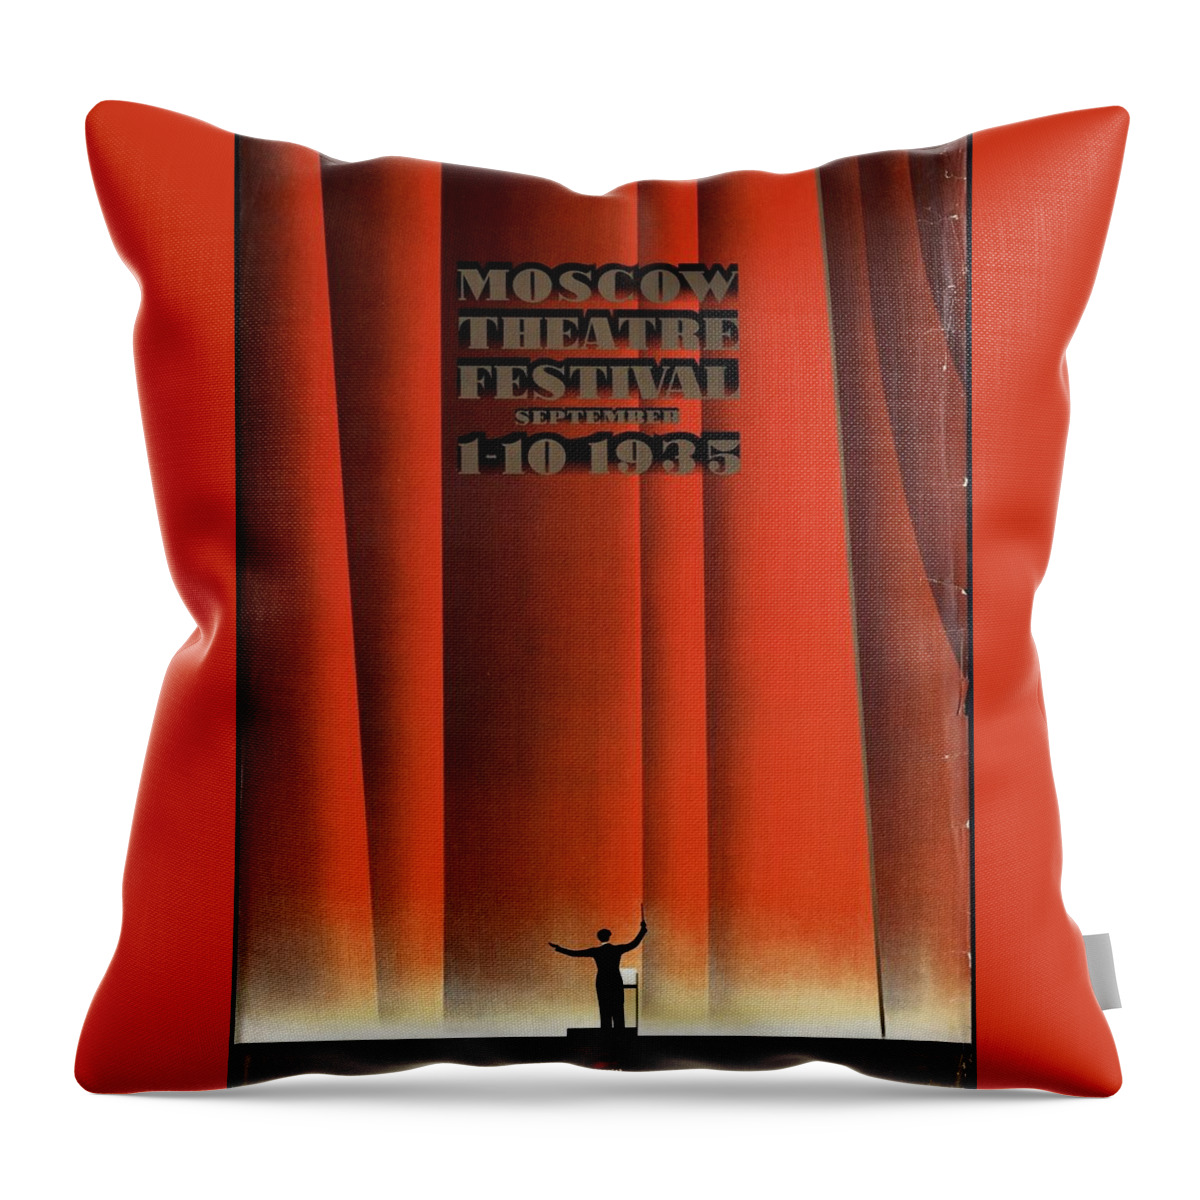 Moscow Throw Pillow featuring the photograph Moscow Theatre Festival 1935 - Russia - Retro travel Poster - Vintage Poster by Studio Grafiikka